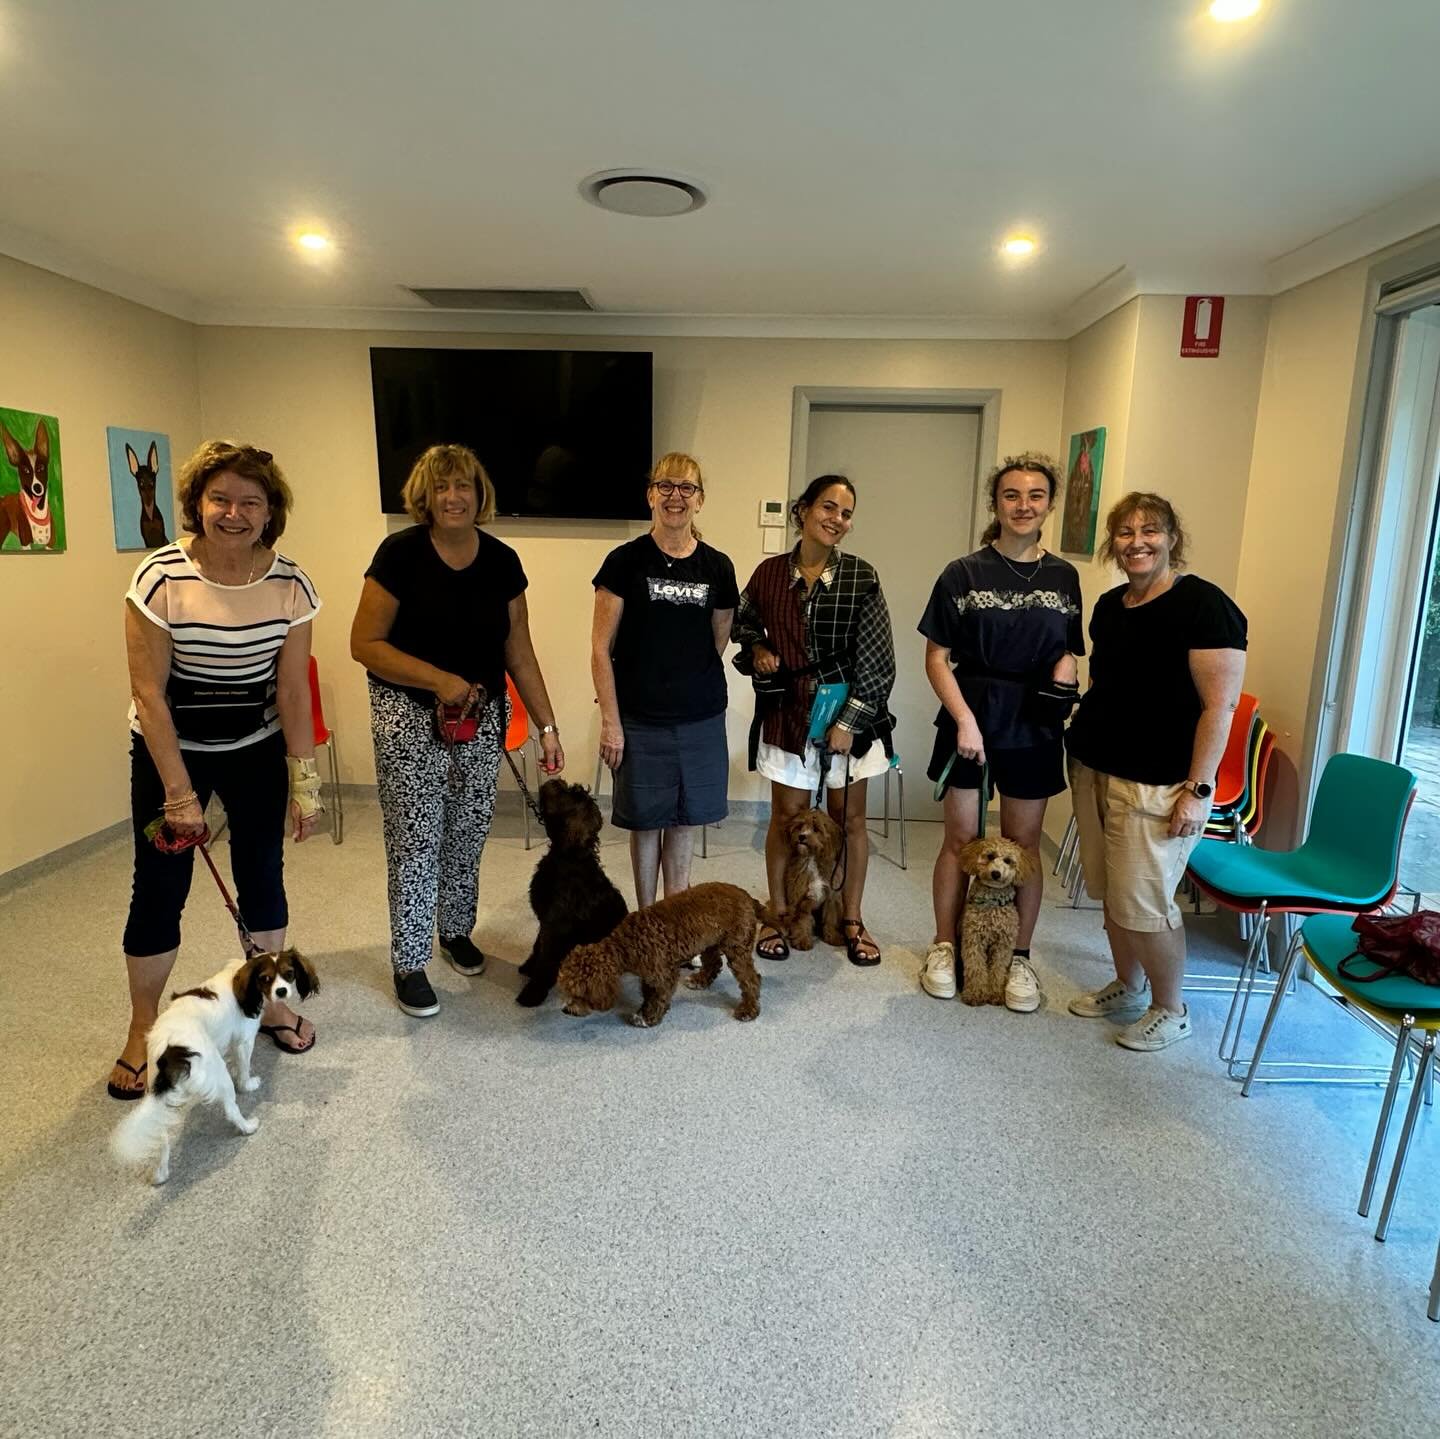 March/April Senior Puppy Class grads (missing a couple who were away) - two brilliant groups who put huge efforts into their training - loved seeing many puppy grads returning to class and growing rapidly into teenagers 🤩

Next senior puppy classes 